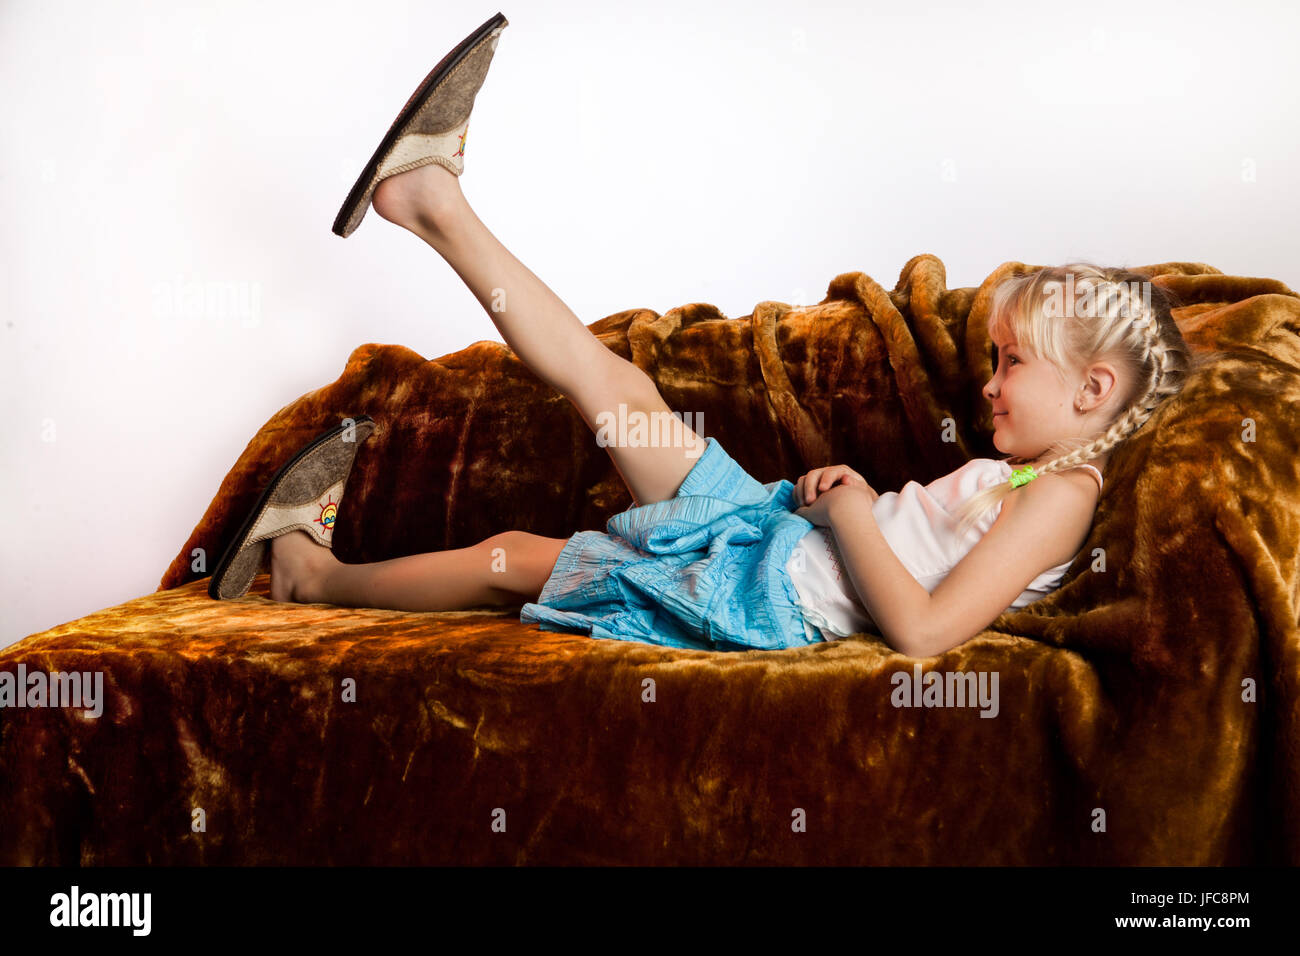 Little Girl And Big Shoes Stock Photo